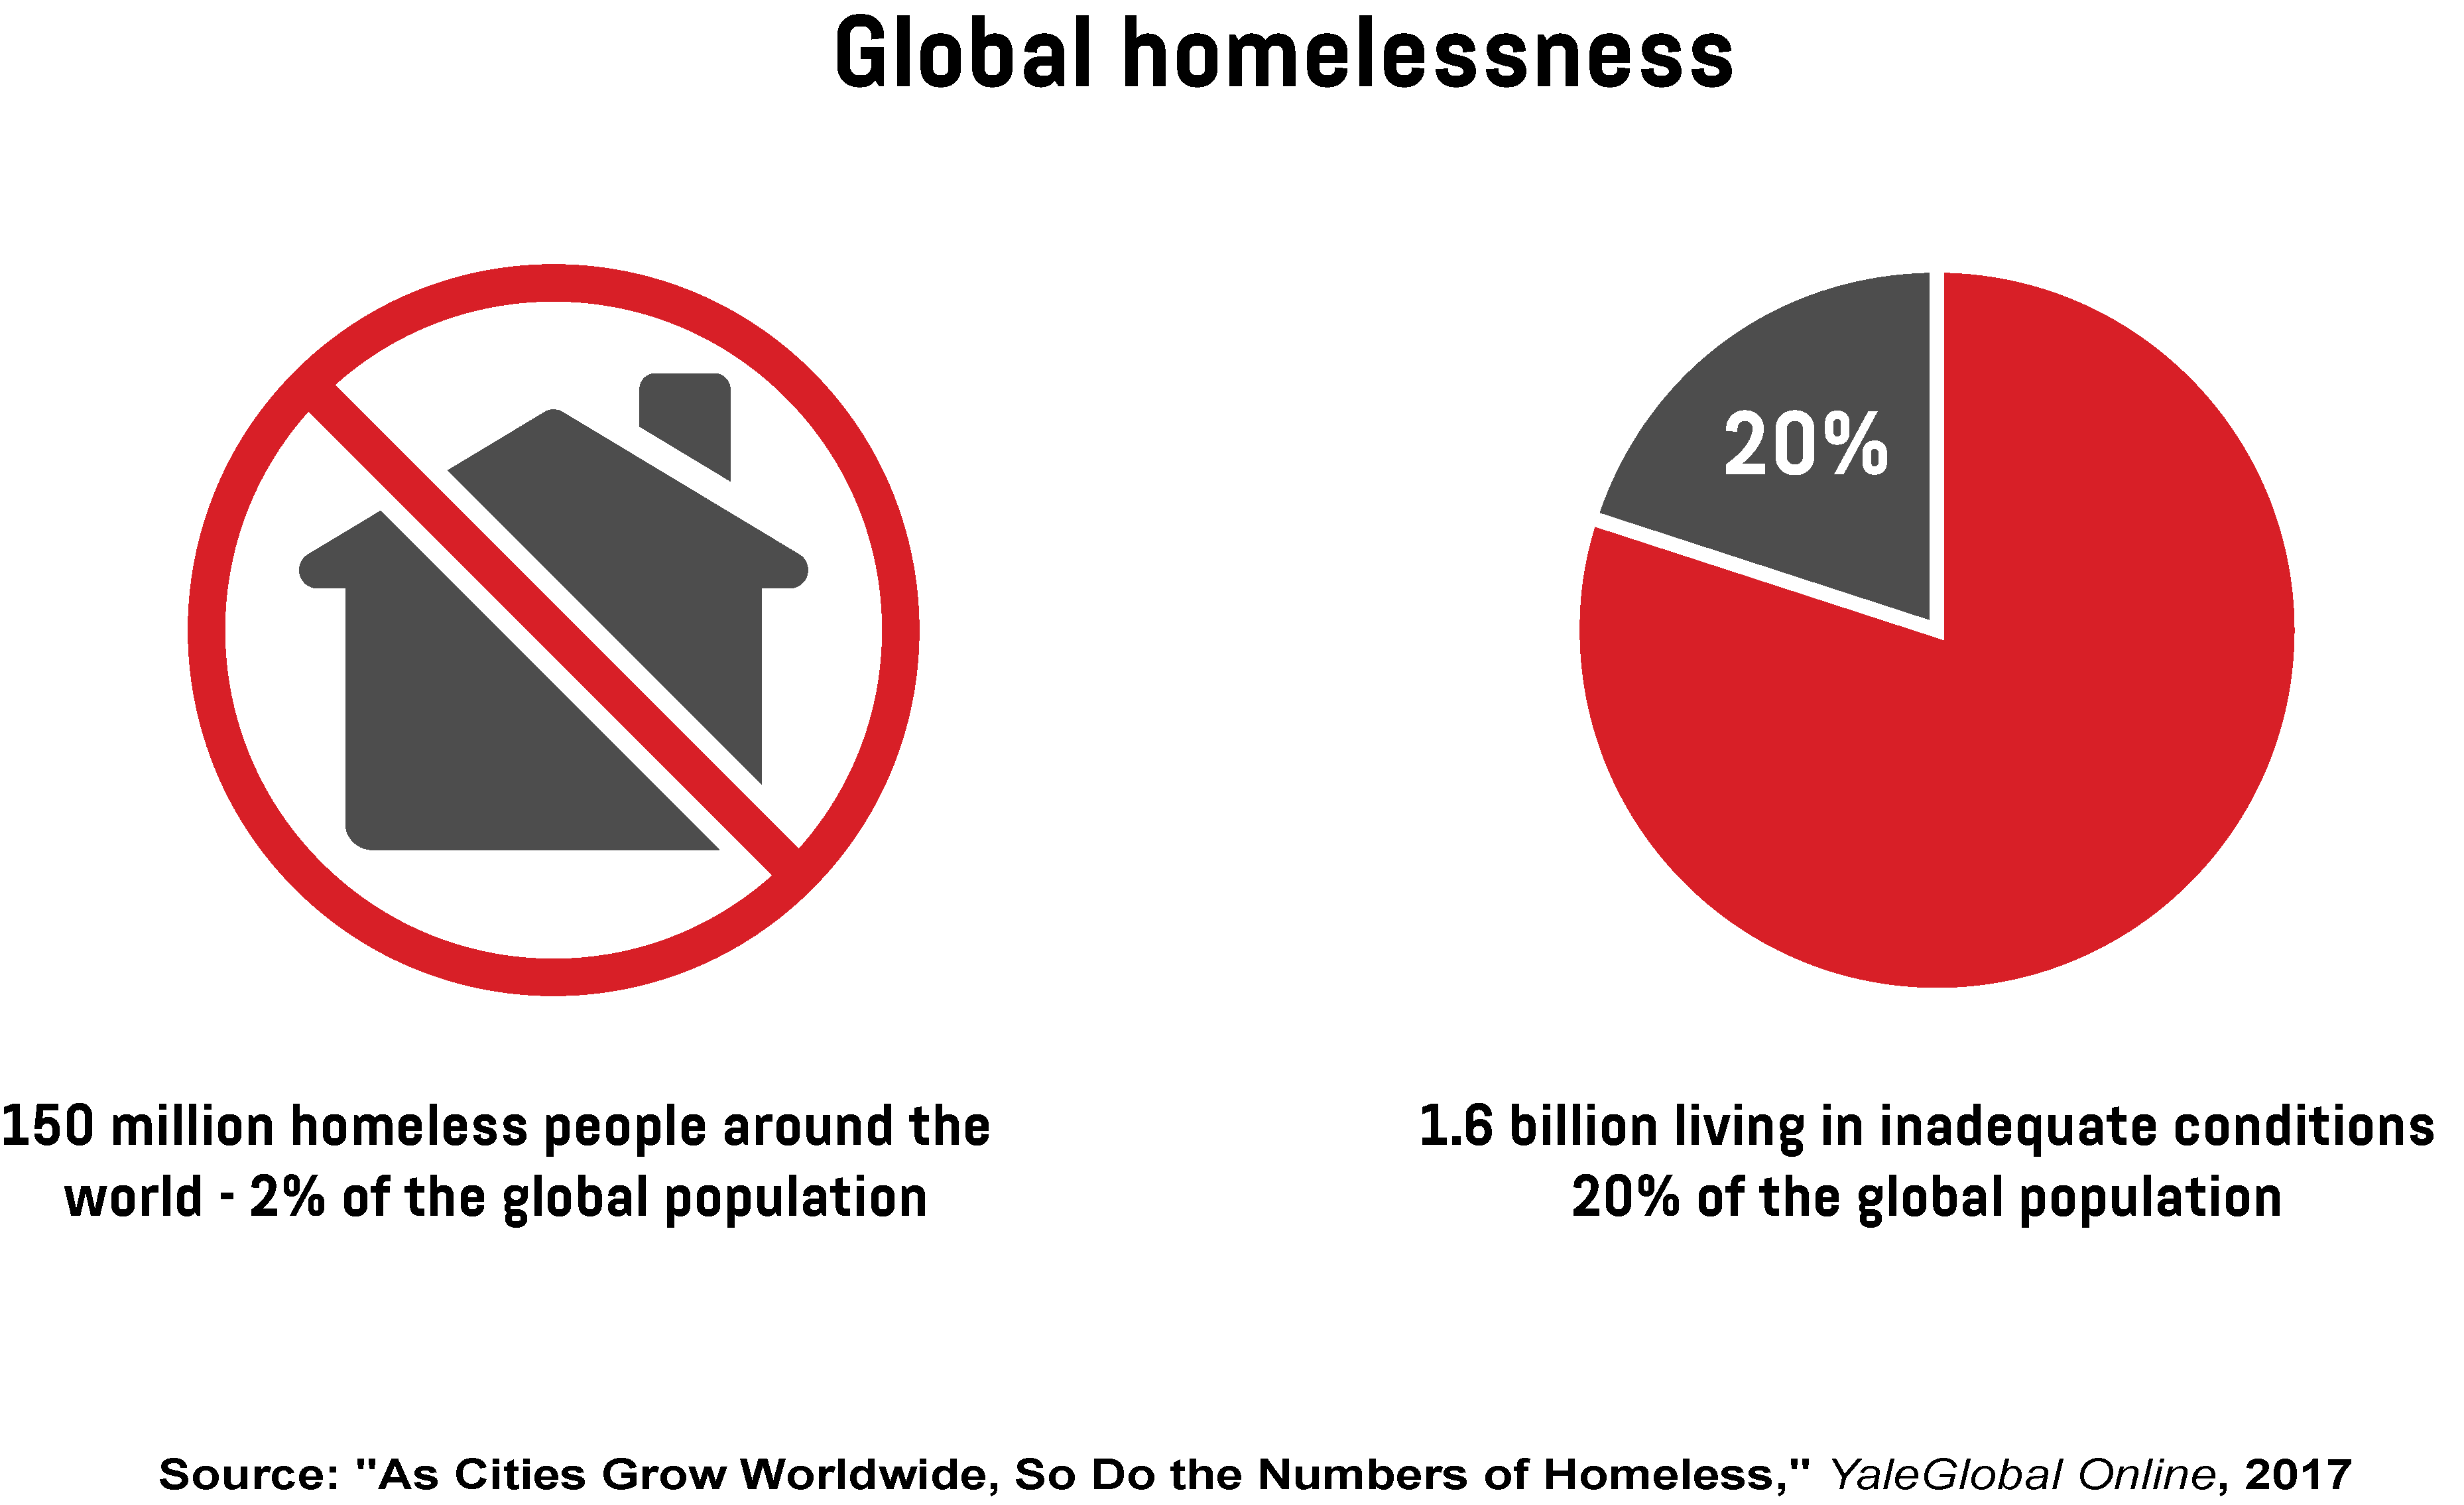 An infographic showing the estimated number of homeless people in the world, as well as those living in inadequate conditions